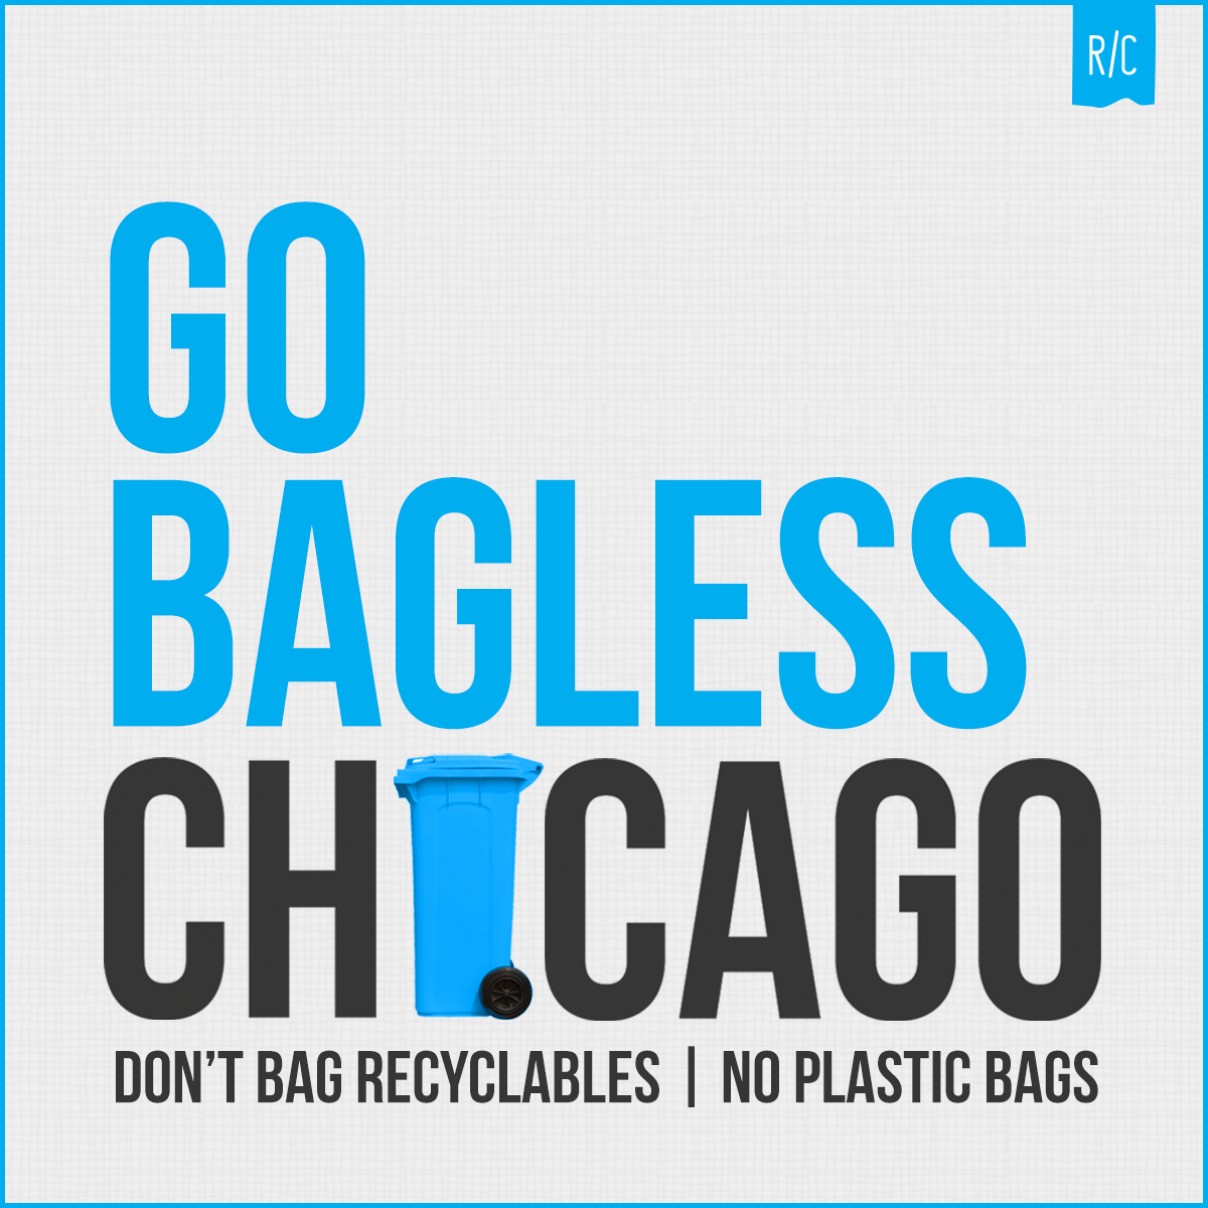 tax on plastic bags in chicago